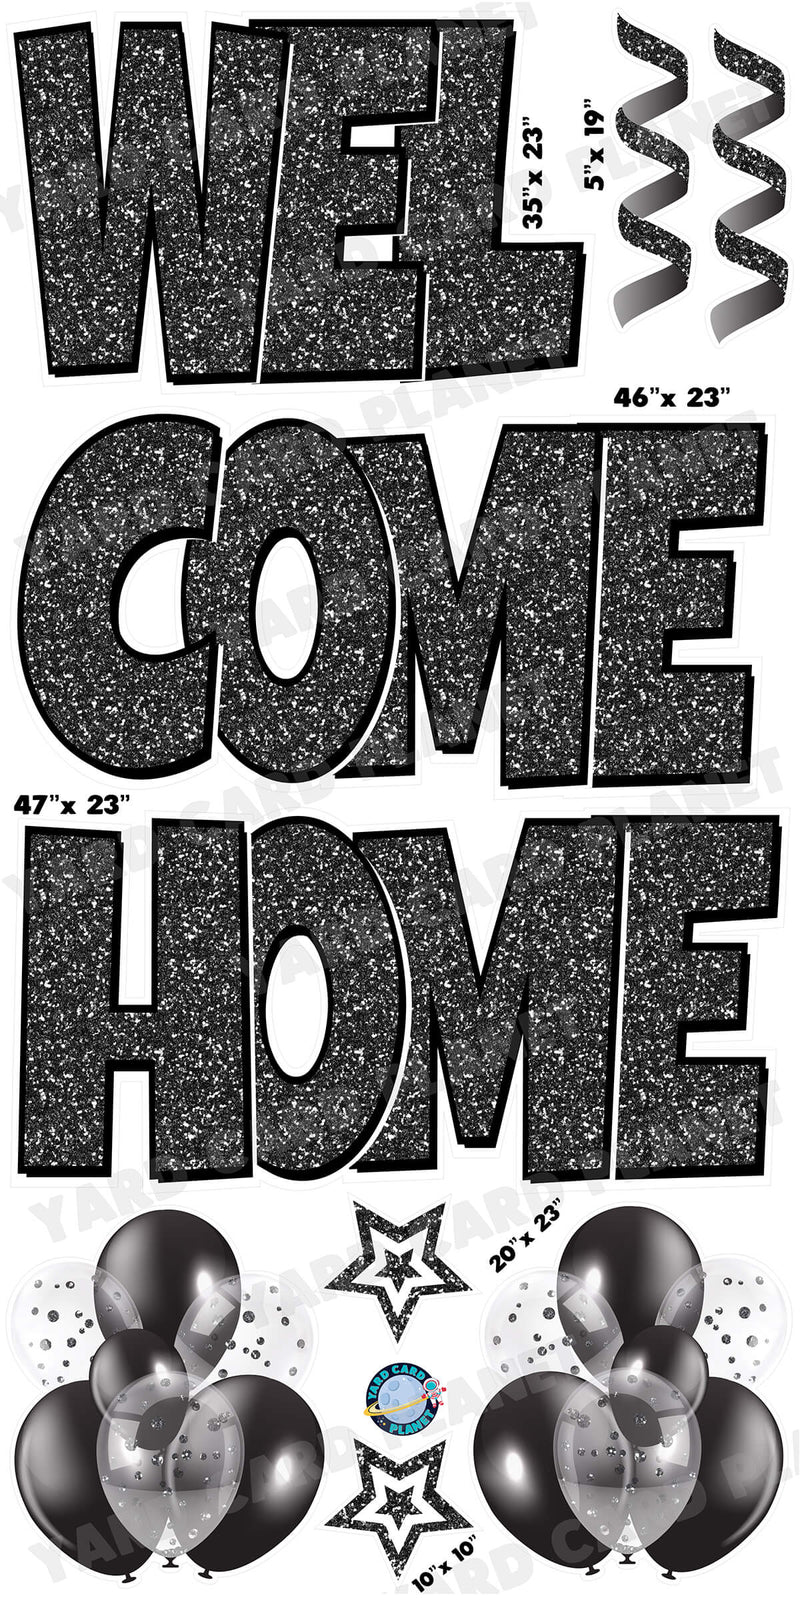 Large 23" Welcome Home Yard Card EZ Quick Sets in Luckiest Guy Font and Flair in Black Glitter Pattern